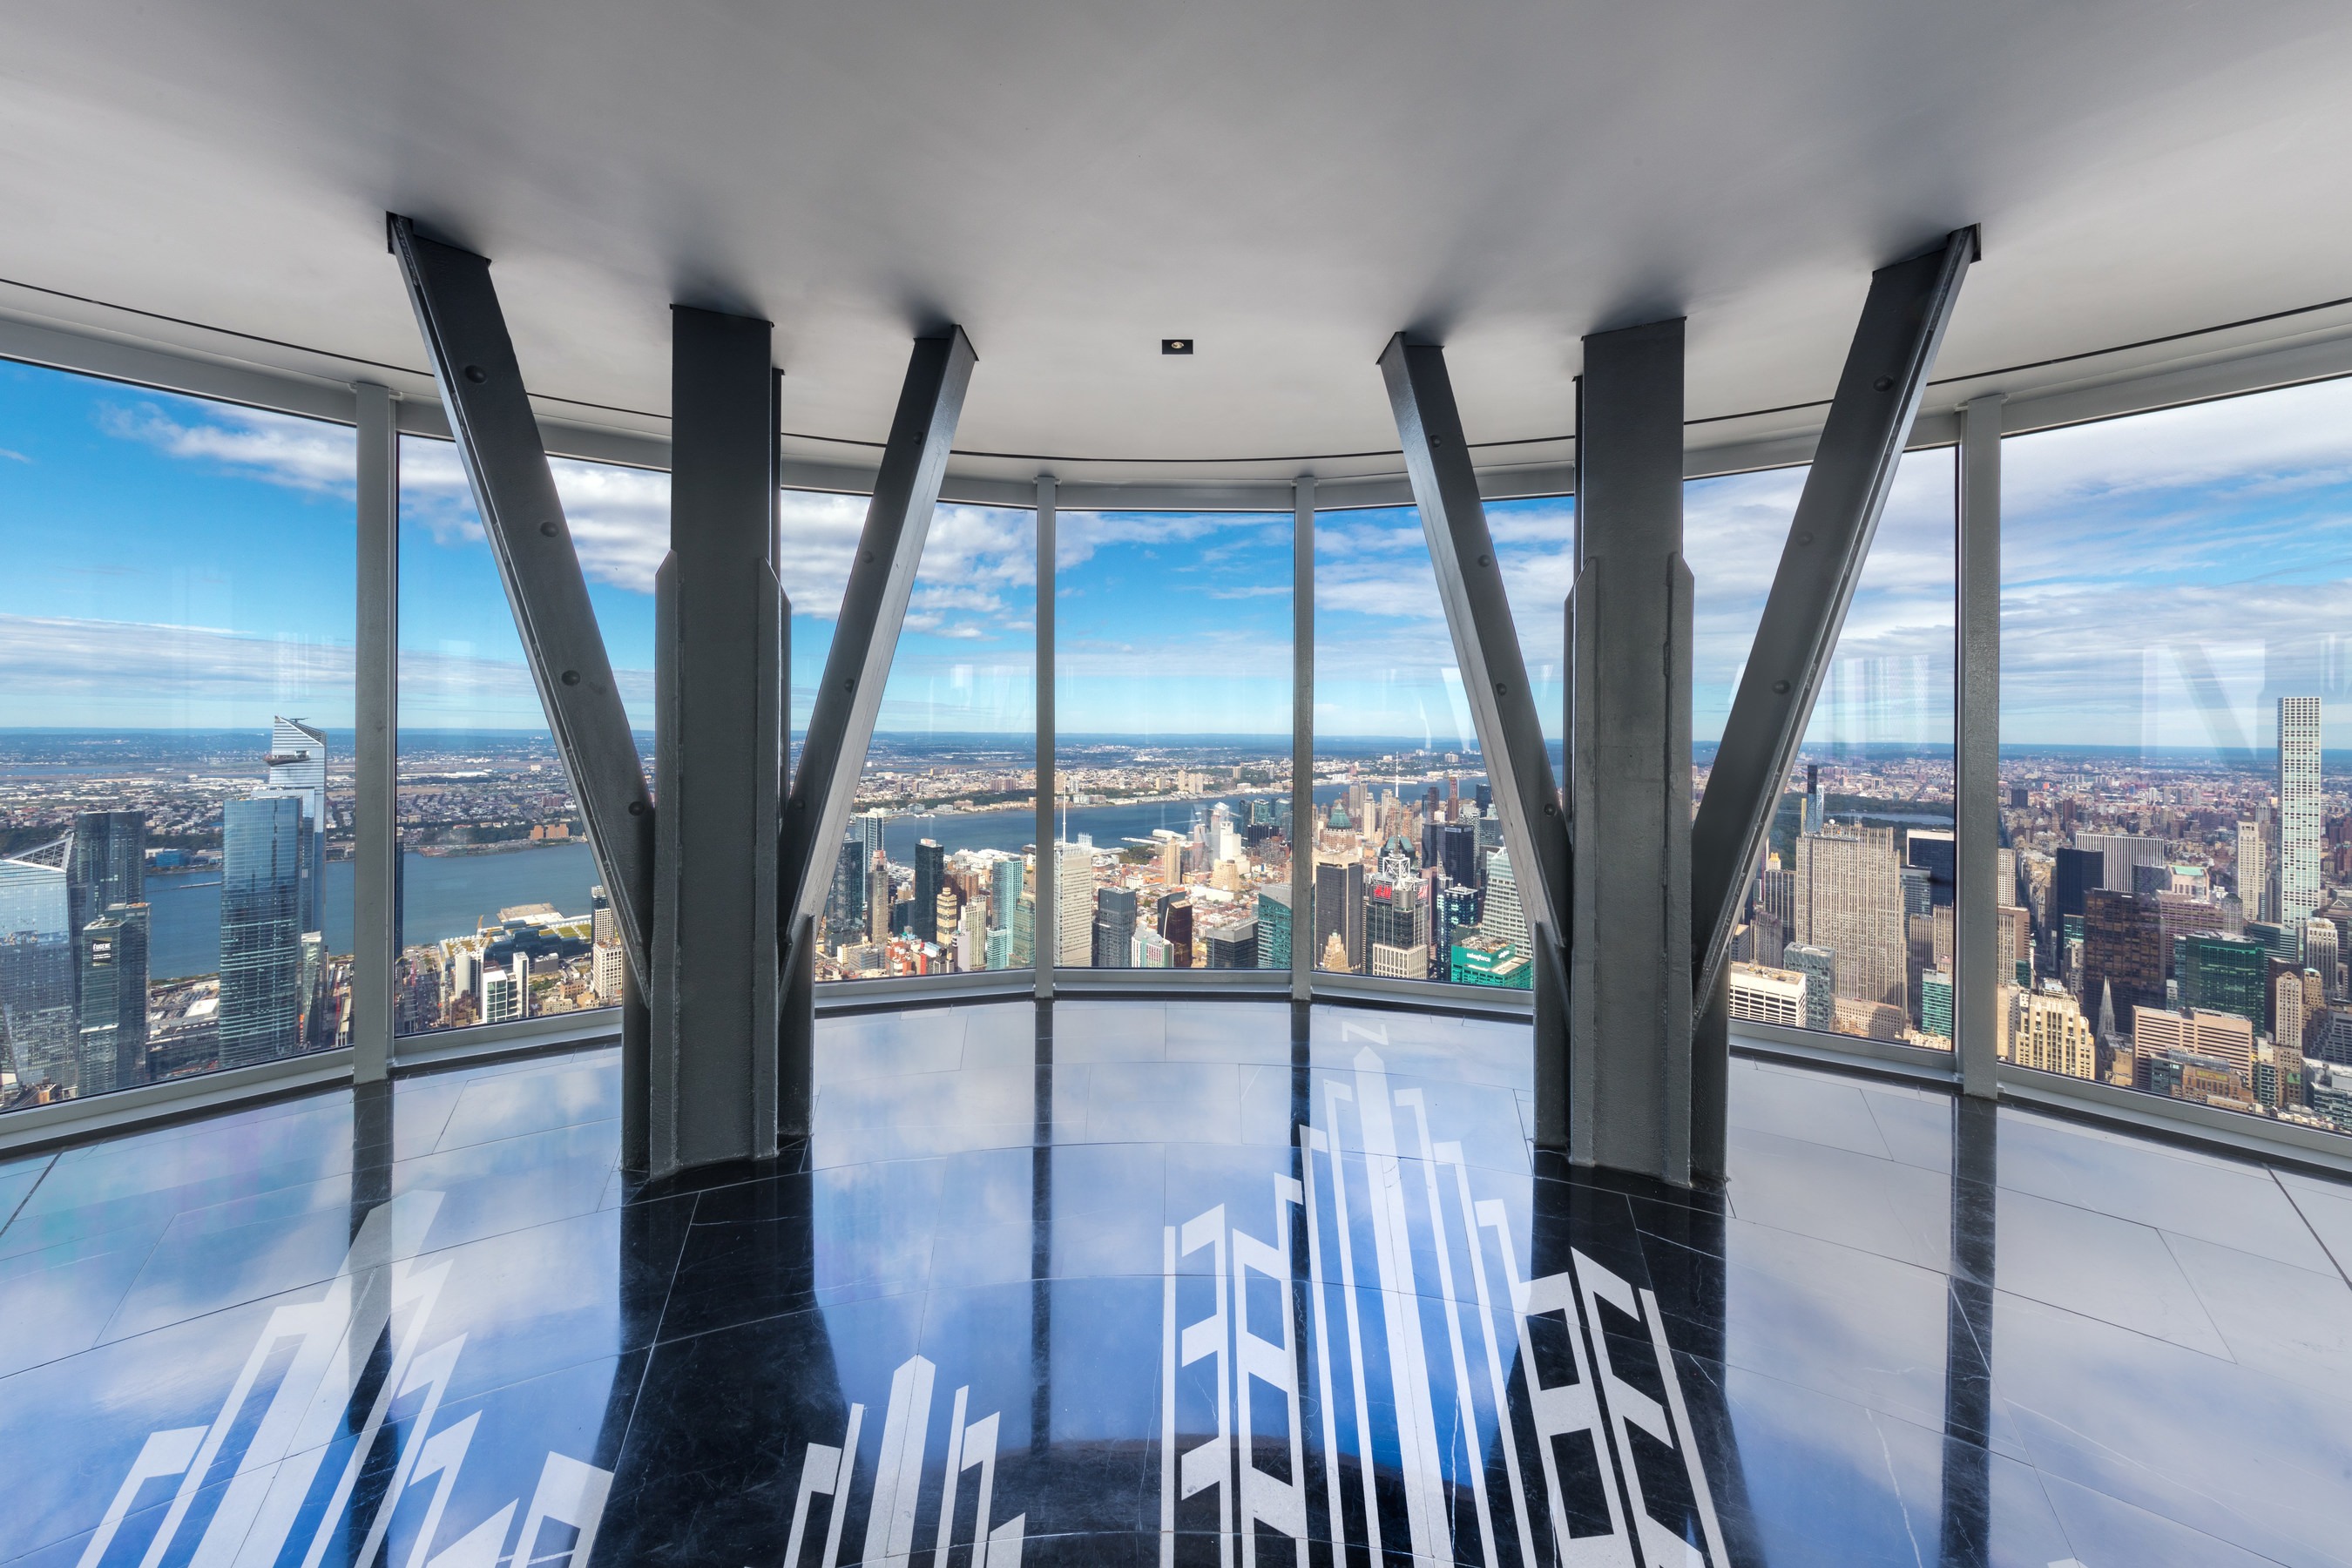 New 102nd Floor Observatory to Open at Empire State Building